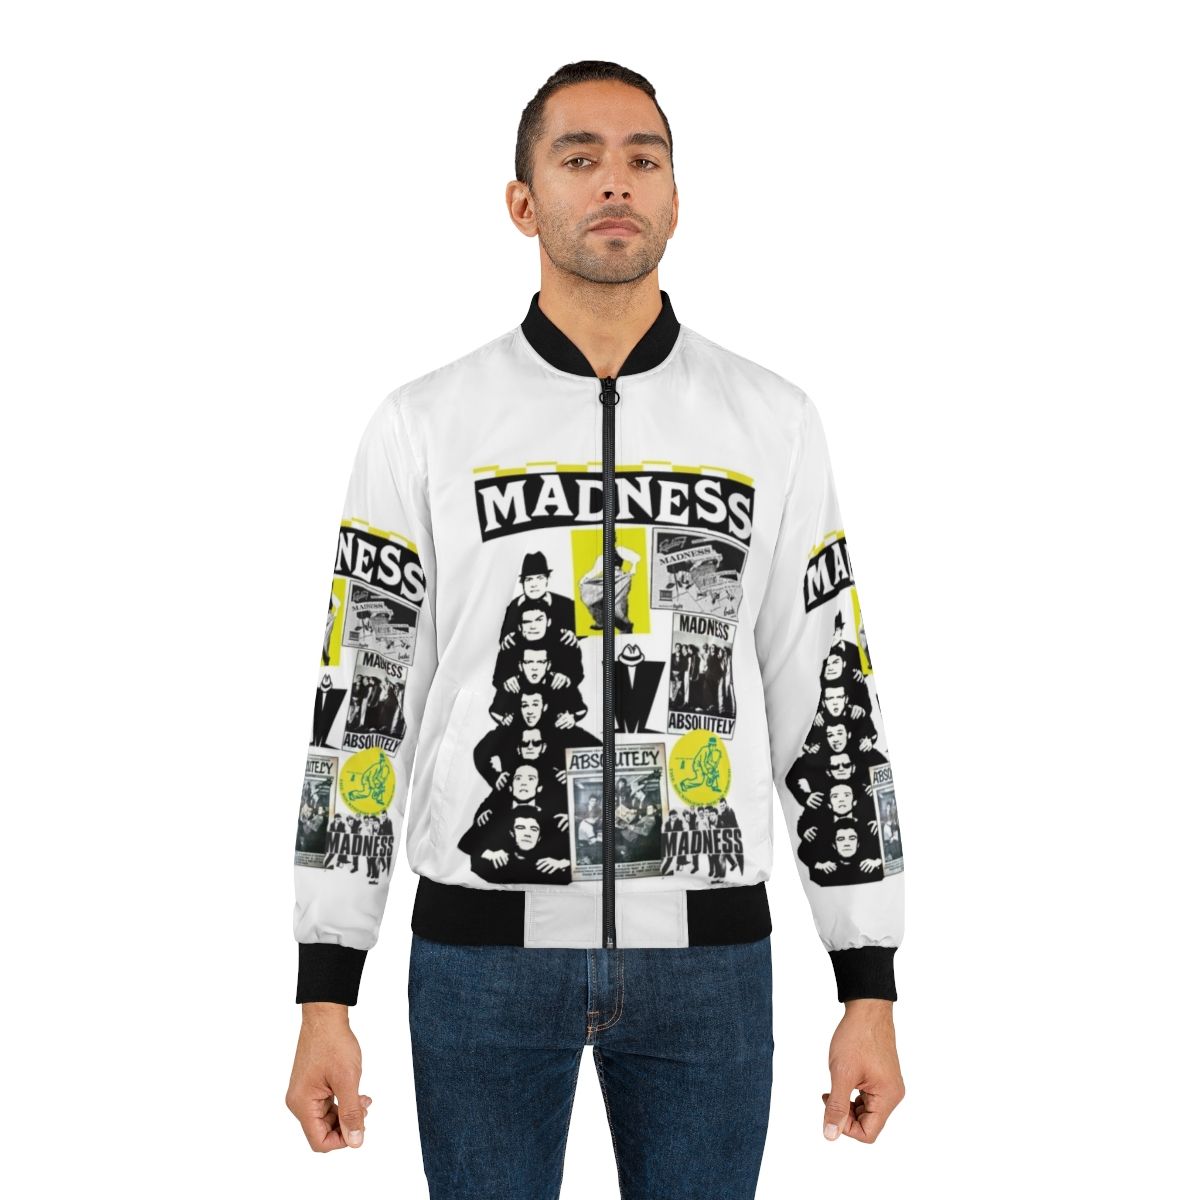 Madness band retro bomber jacket with vintage logo and graphics - Lifestyle